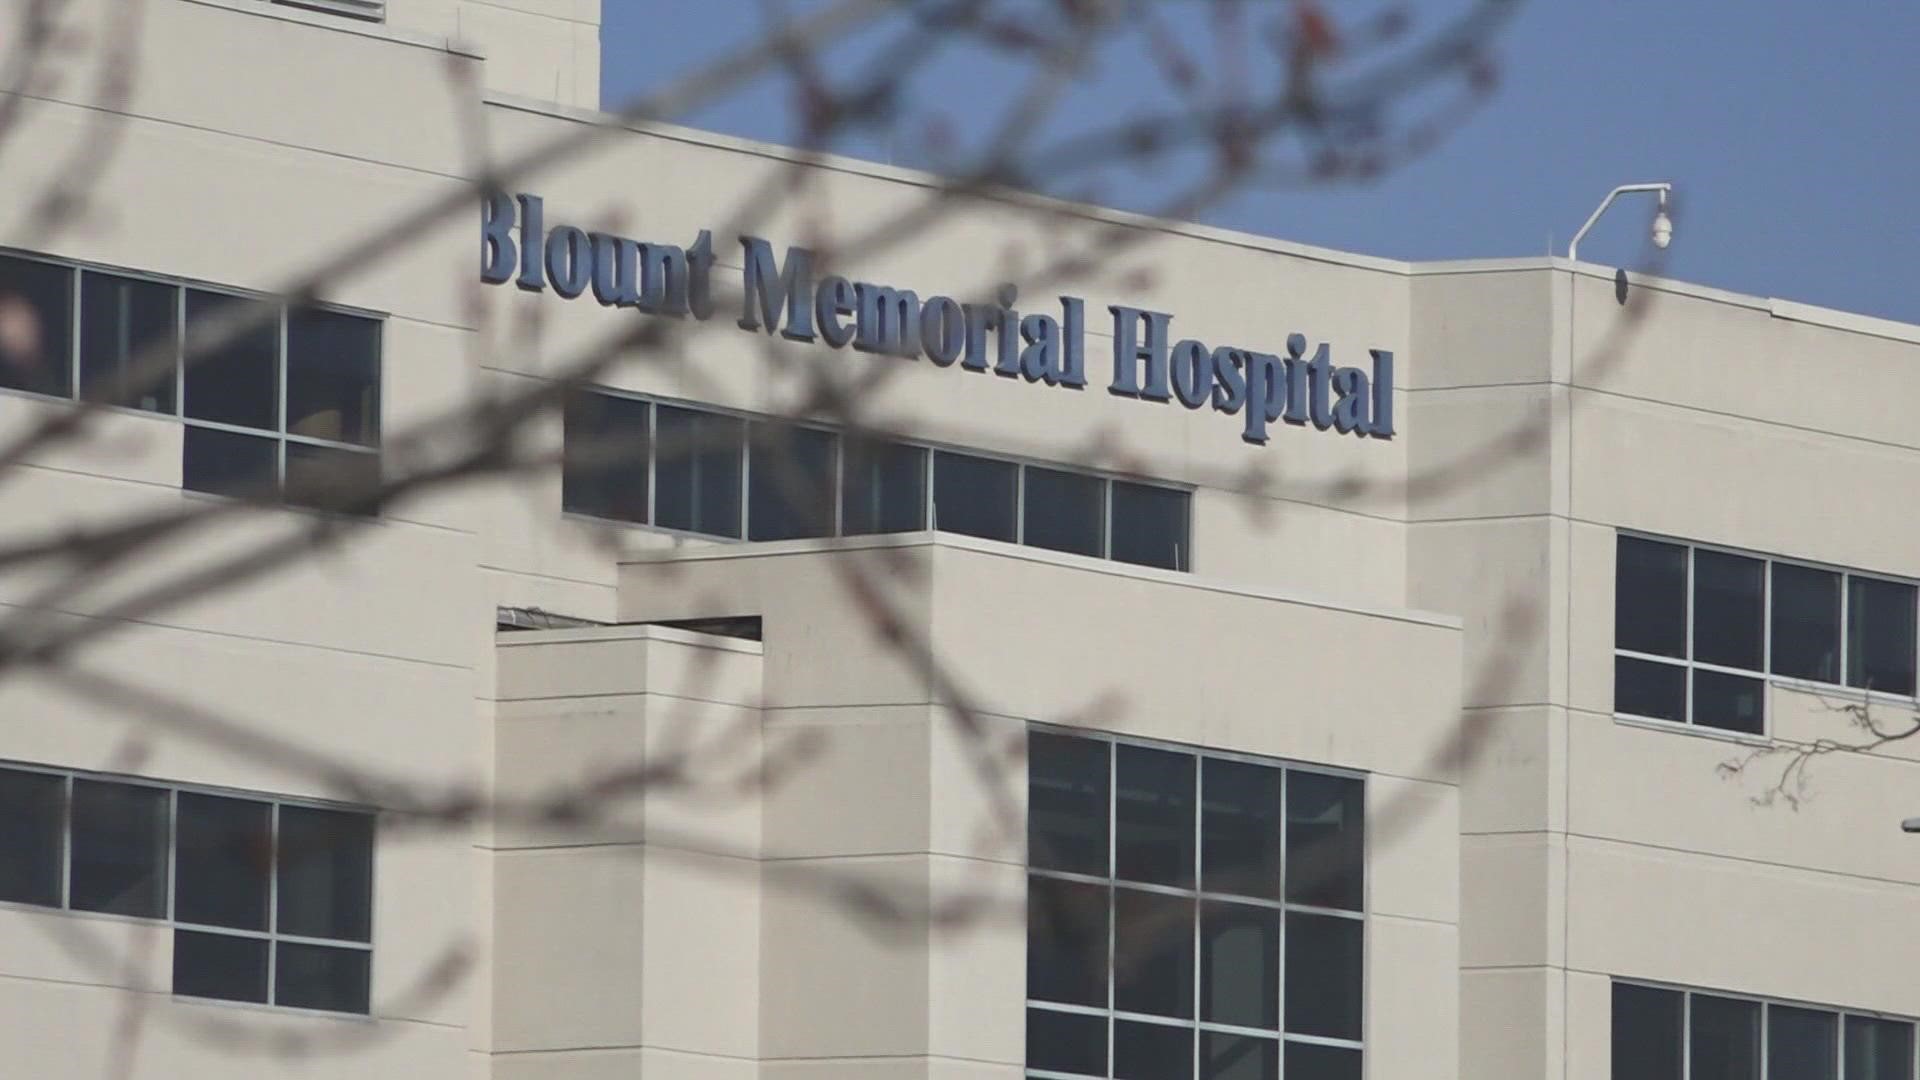 On Wednesday, Blount Memorial Hospital filed a lawsuit asking the Blount Co. Chancery Court to declare them independent from the county commission and the mayor.